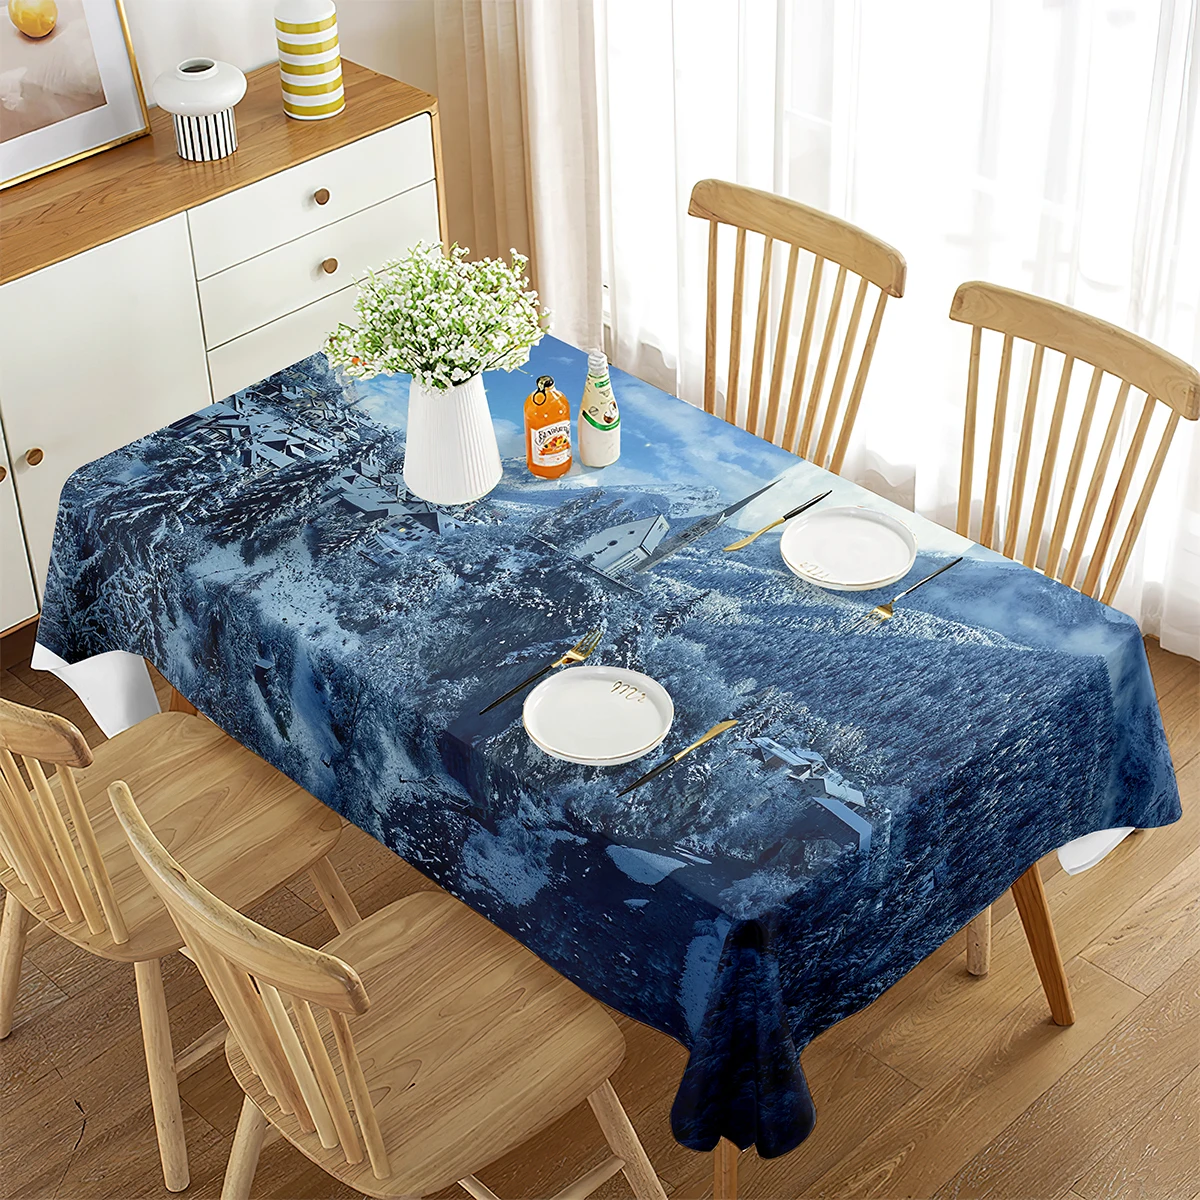 

Valley Tablecloth Snow Mountain Snow Covered Pine Forest Natural Landscape Theme Tablecloth Decoration for Kitchen Dining Room